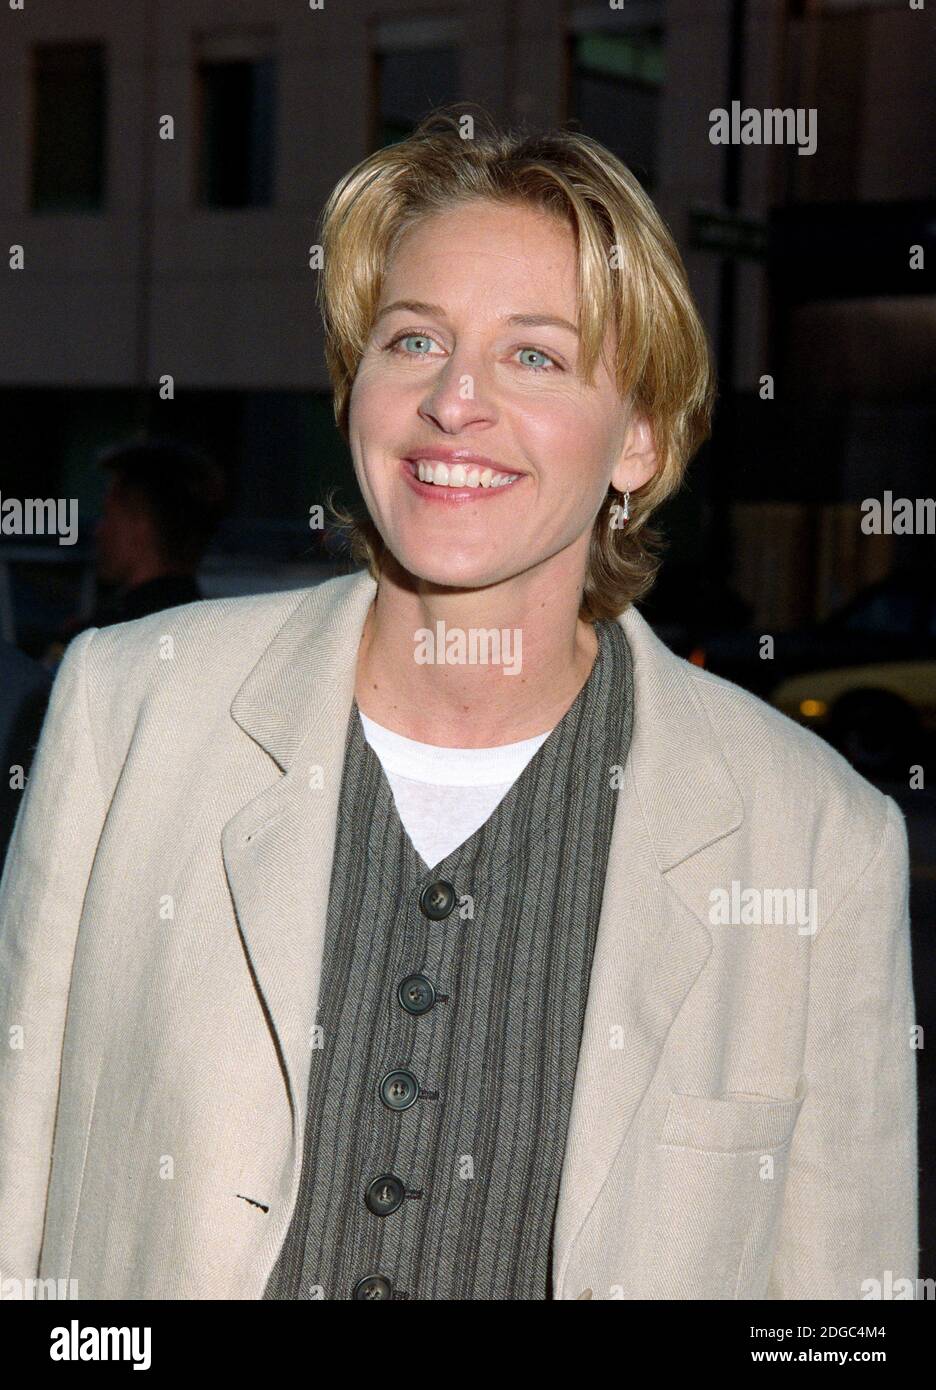 ARCHIVE: LOS ANGELES, CA. July 28, 1994: Actress/comedian Ellen Degeneres at the premiere of 'The Mask' in Los Angeles. File photo © Paul Smith/Featureflash Stock Photo